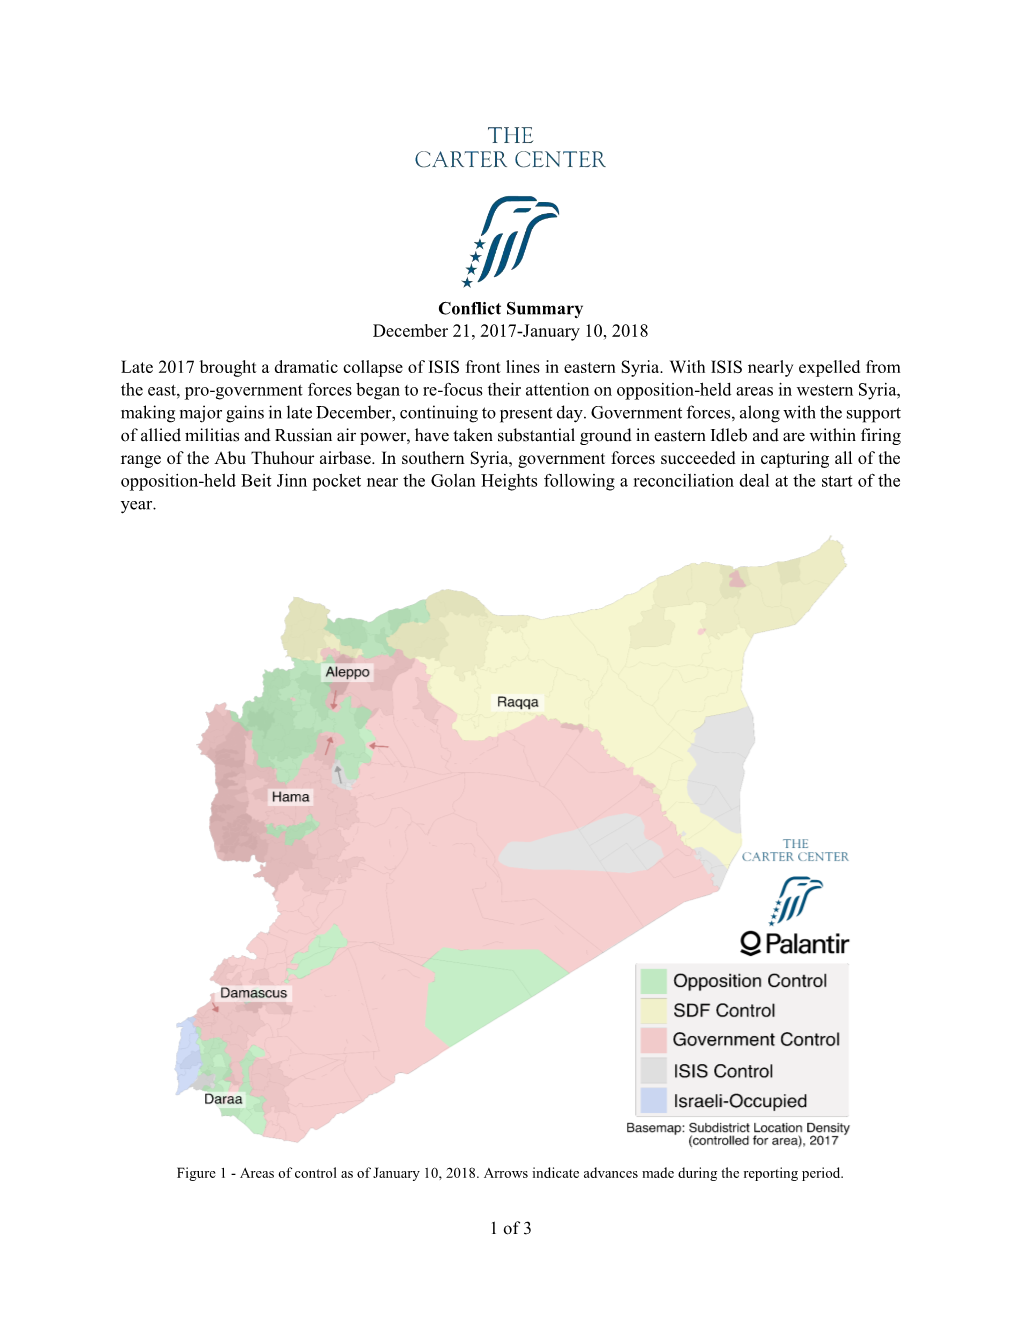 1 of 3 Conflict Summary December 21, 2017-January 10, 2018 Late